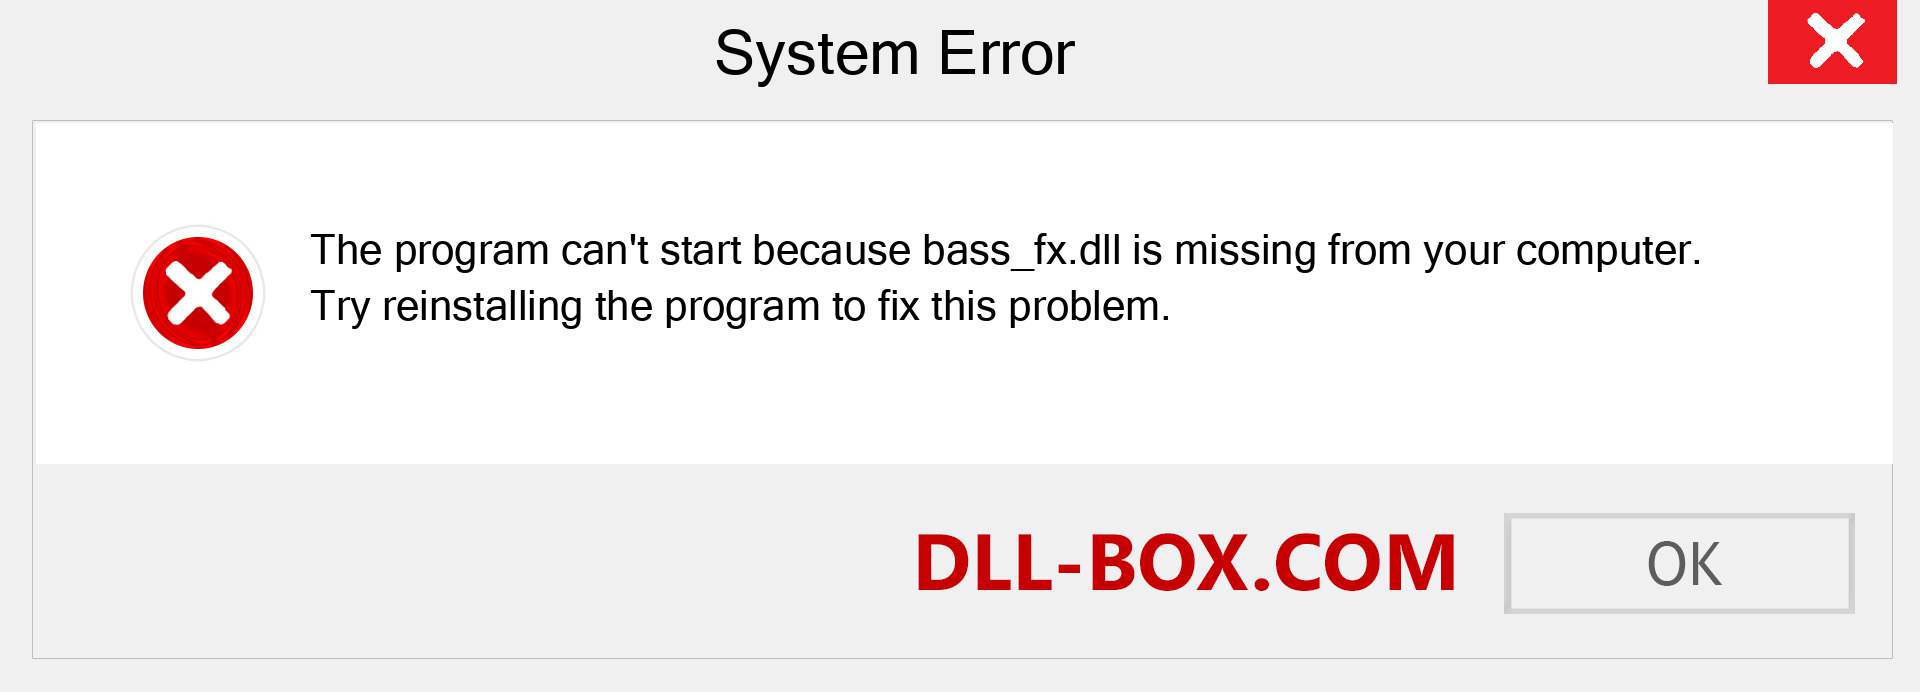  bass_fx.dll file is missing?. Download for Windows 7, 8, 10 - Fix  bass_fx dll Missing Error on Windows, photos, images